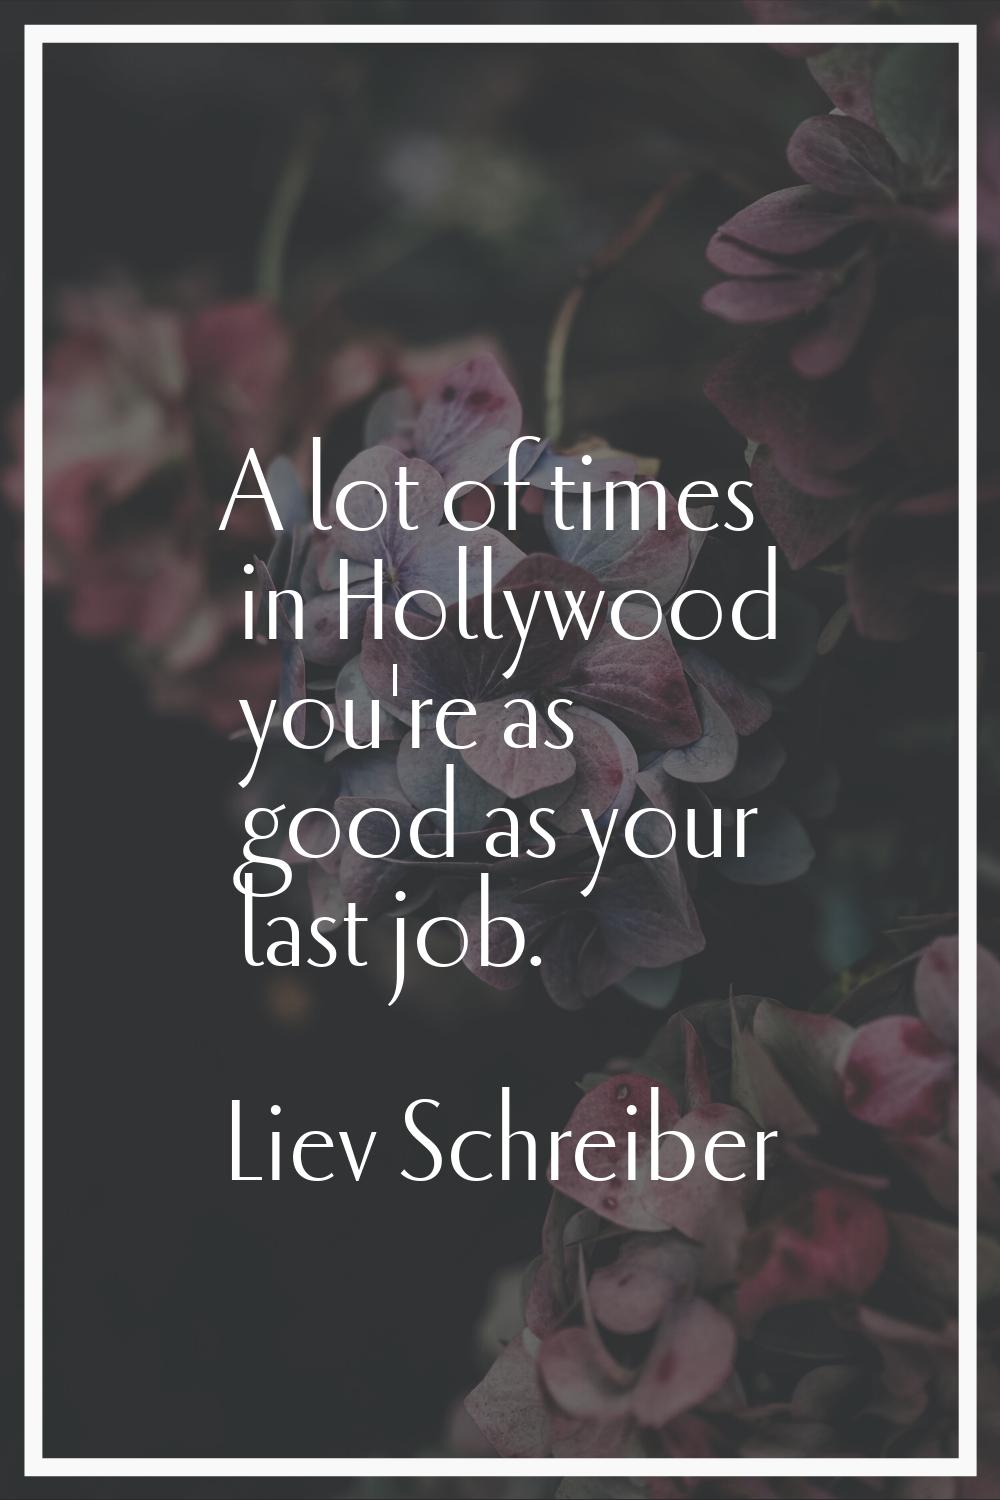 A lot of times in Hollywood you're as good as your last job.